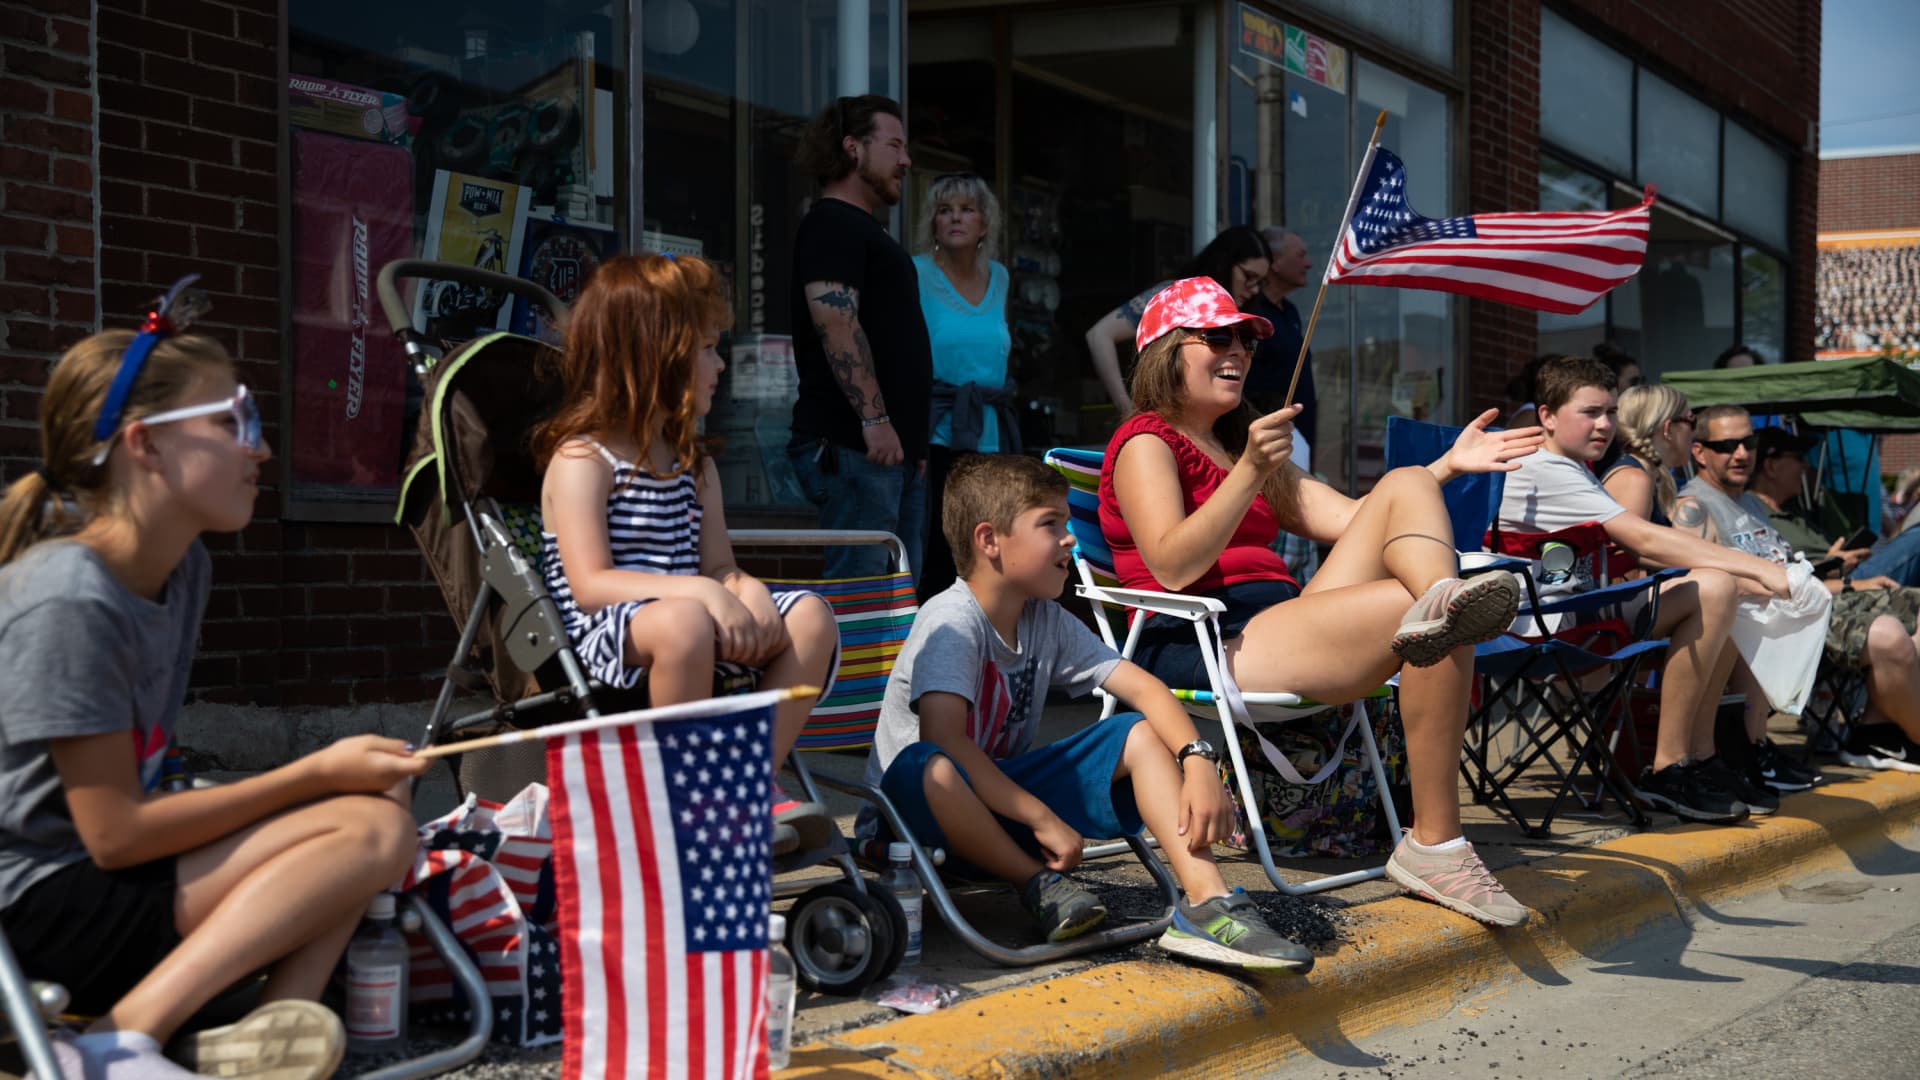 Residents line up with chairs on the side of the street as they watch an Independence Day celebration parade on July 4, 2021 in Brighton, Michigan.